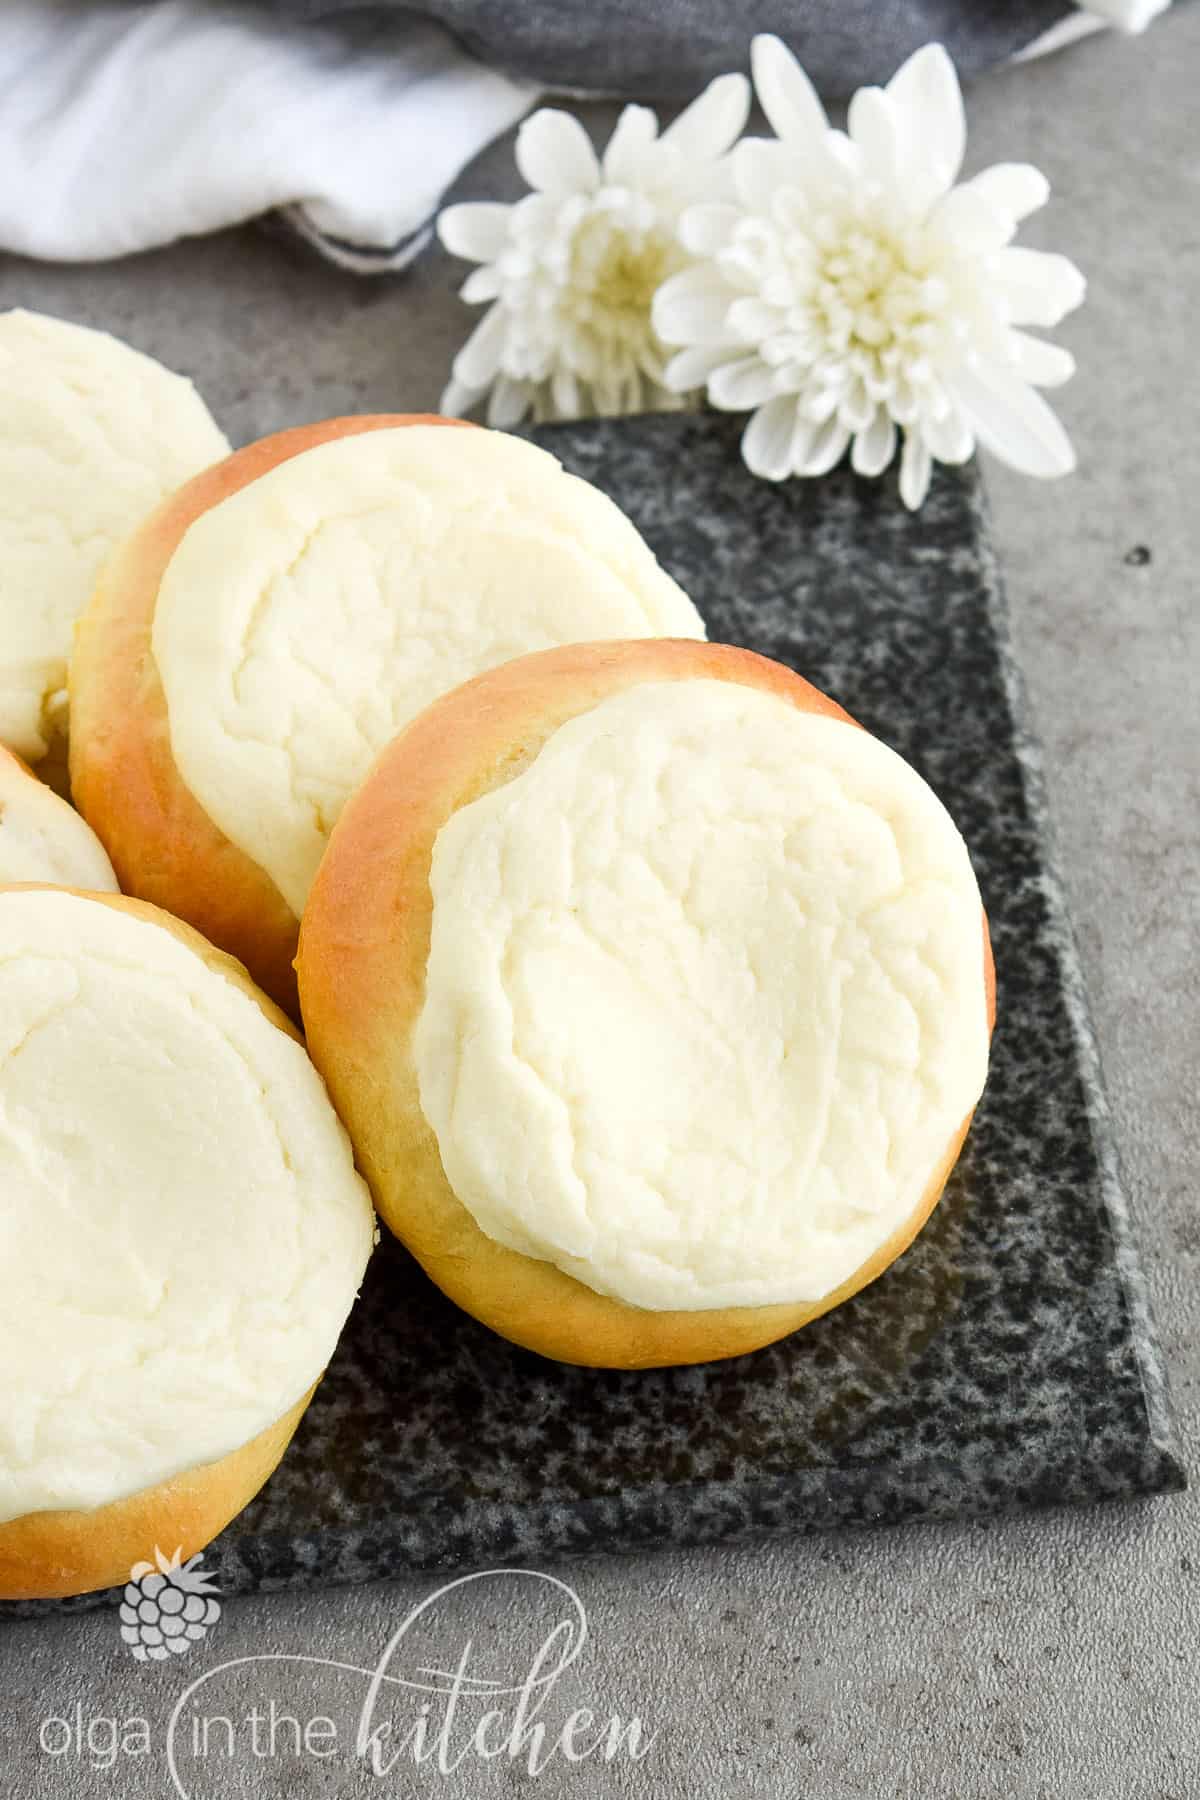 Sweet Cheese Filled Buns (Vatrushka Recipe): freezer-friendly, soft and fluffy sweet buns filled with smooth farmer’s cheese filling. | olgainthekitchen.com #vatrushka #sweetbuns #farmerscheese #olgainthekitchen #bread #ukrainianrecipe #cheesebuns